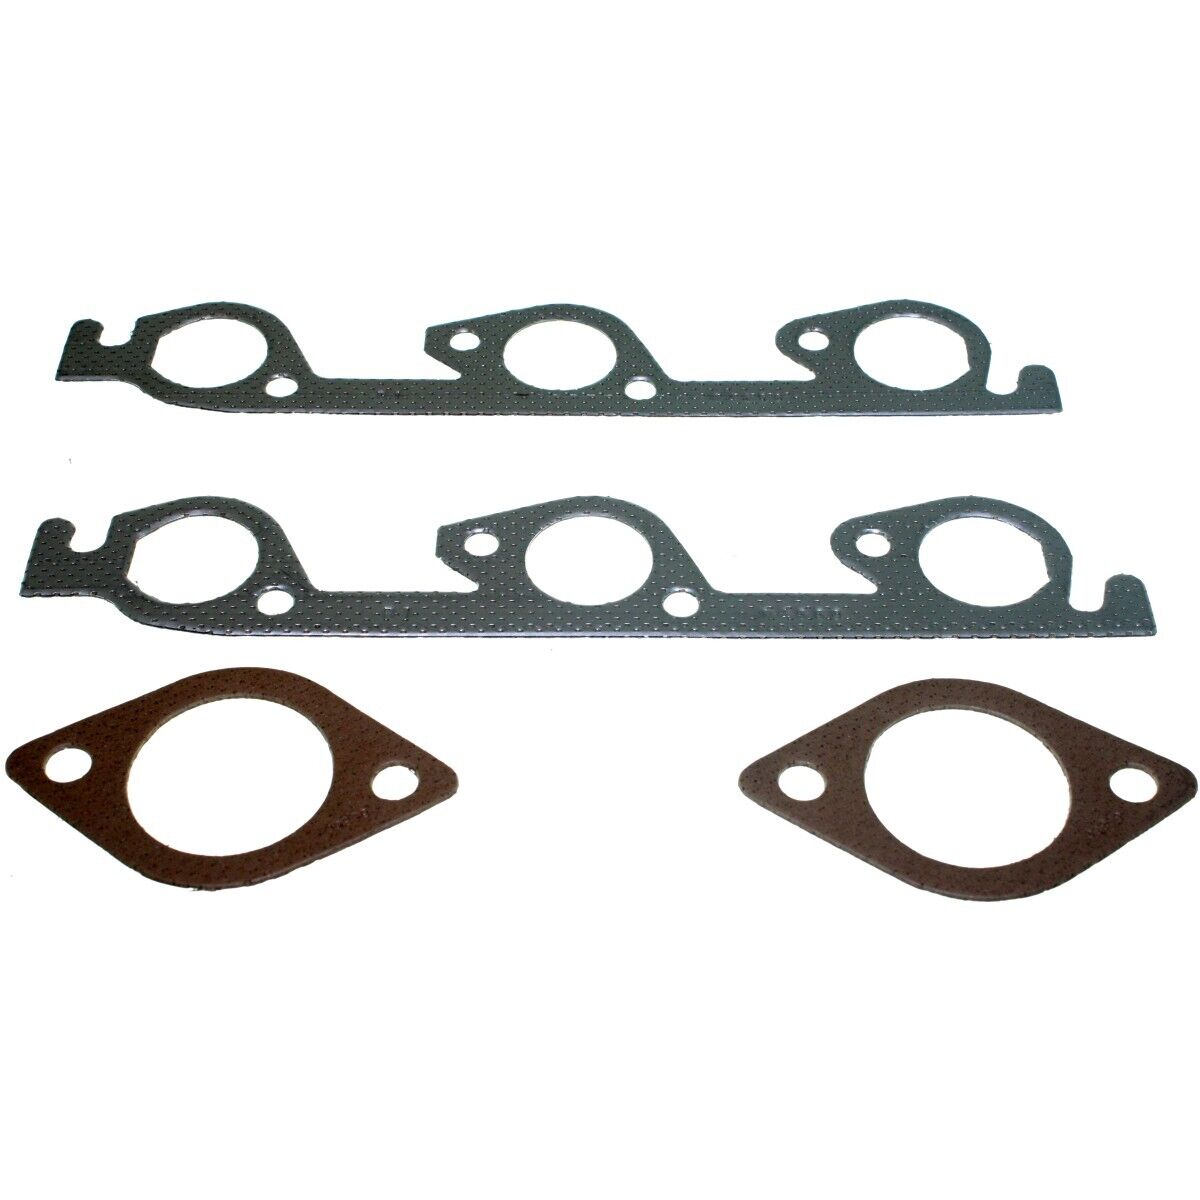 MS94666 Felpro Set Exhaust Manifold Gaskets New for VW Town and Country Dodge